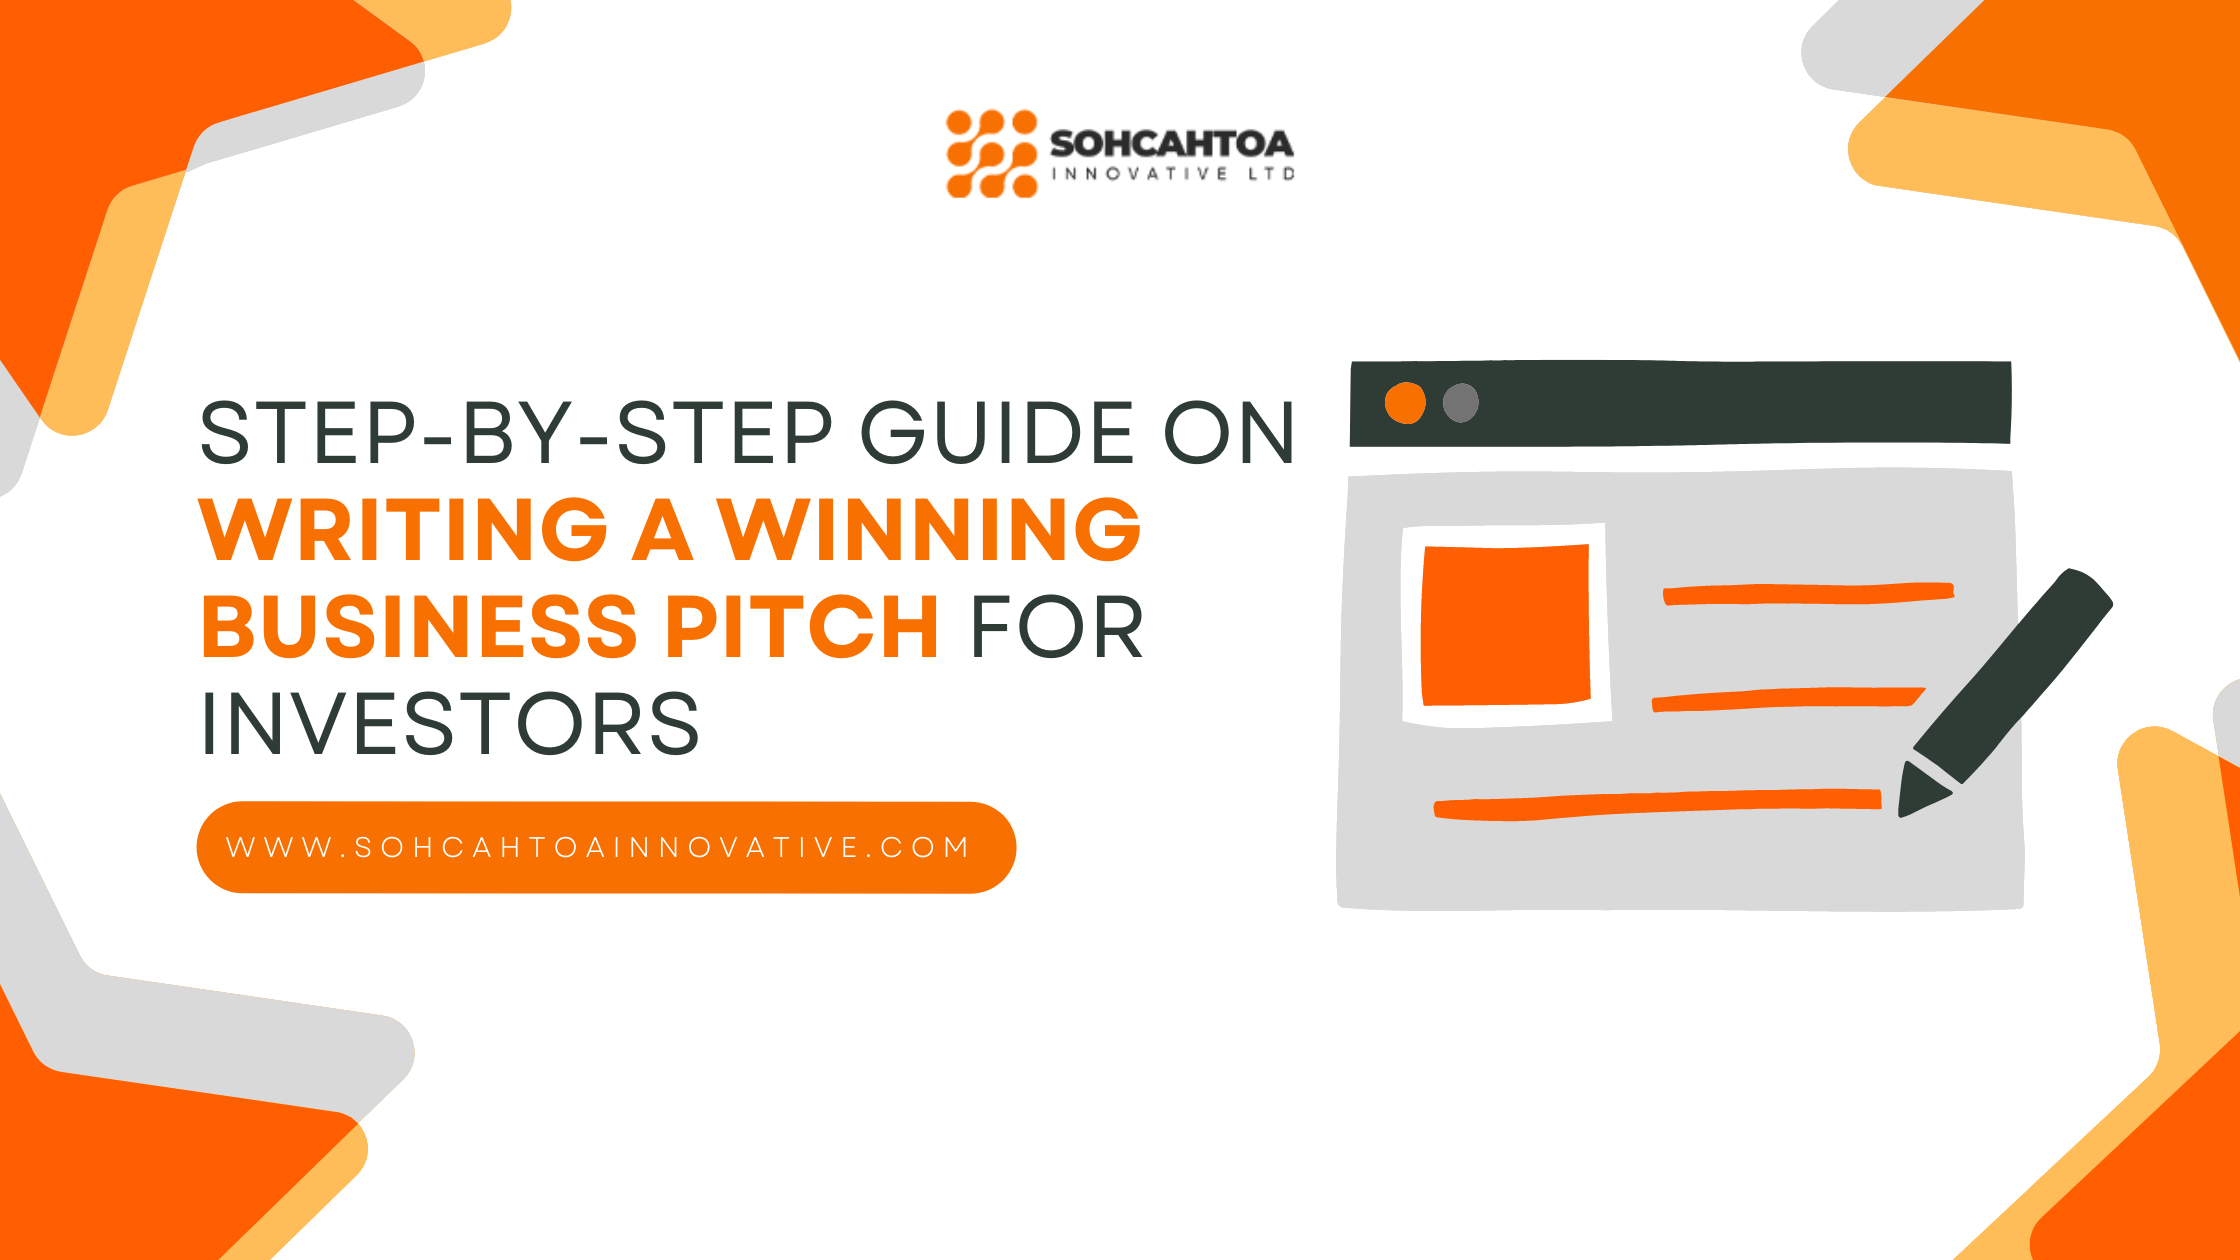 Steps to Writing a Winning Business Pitch for Investors